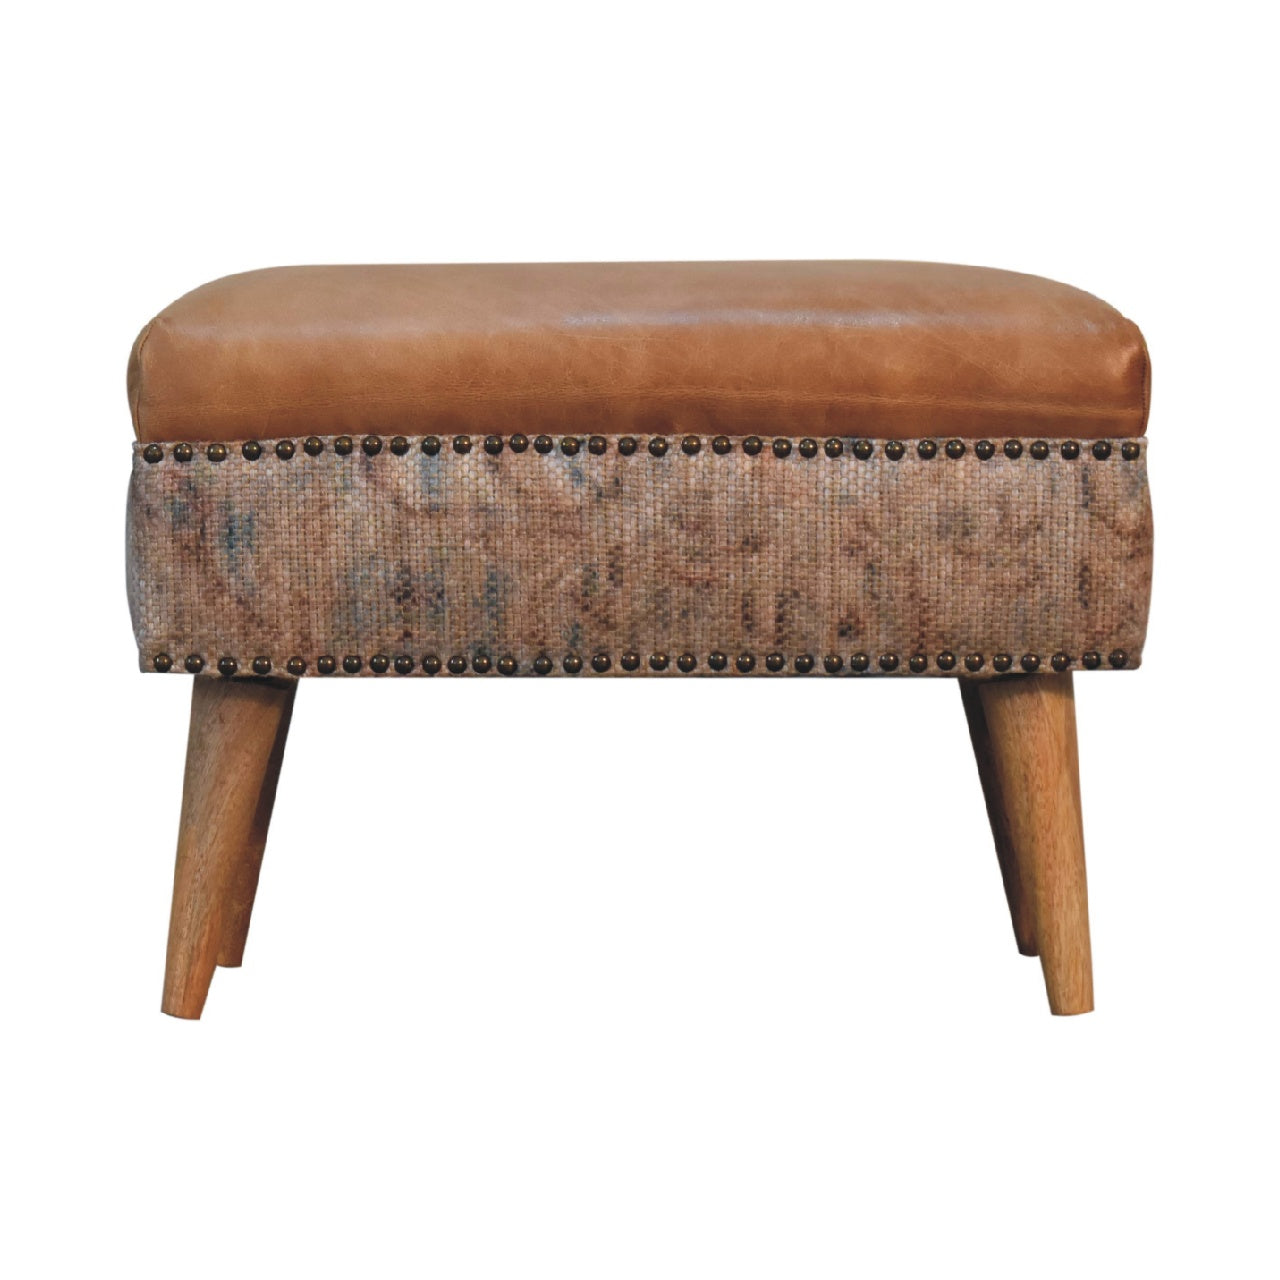 View Haven Durrie Footstool information